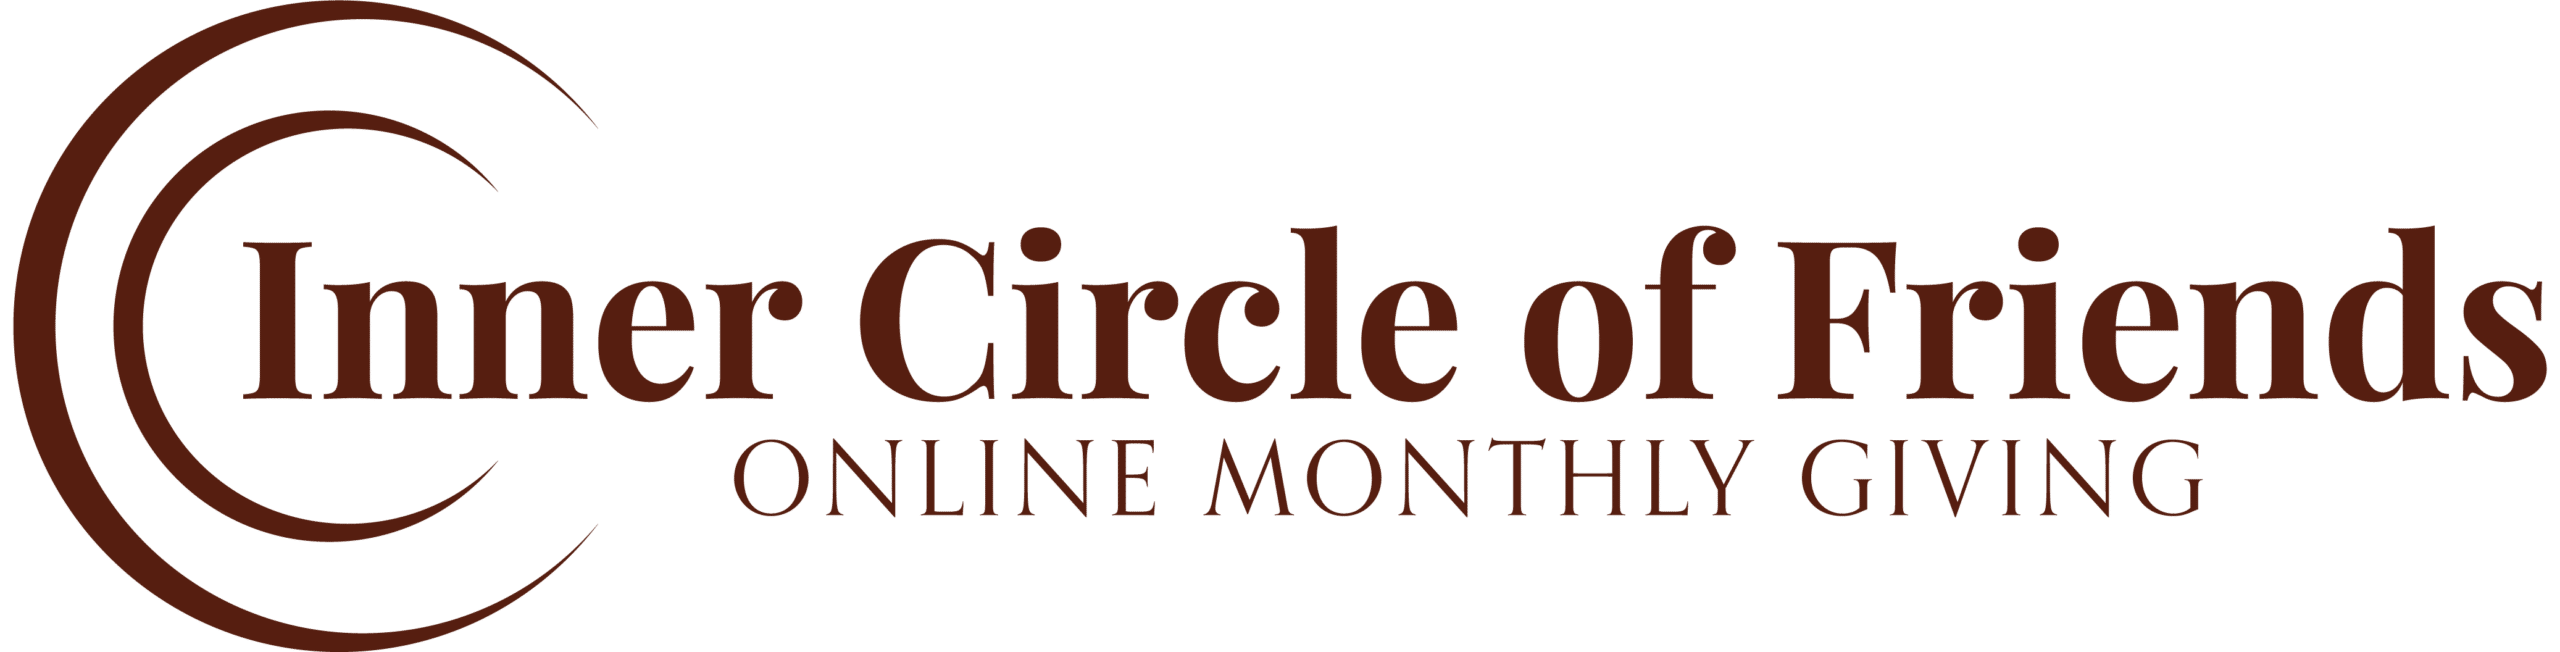 Inner Circle of Friends Logo August 2021 RED